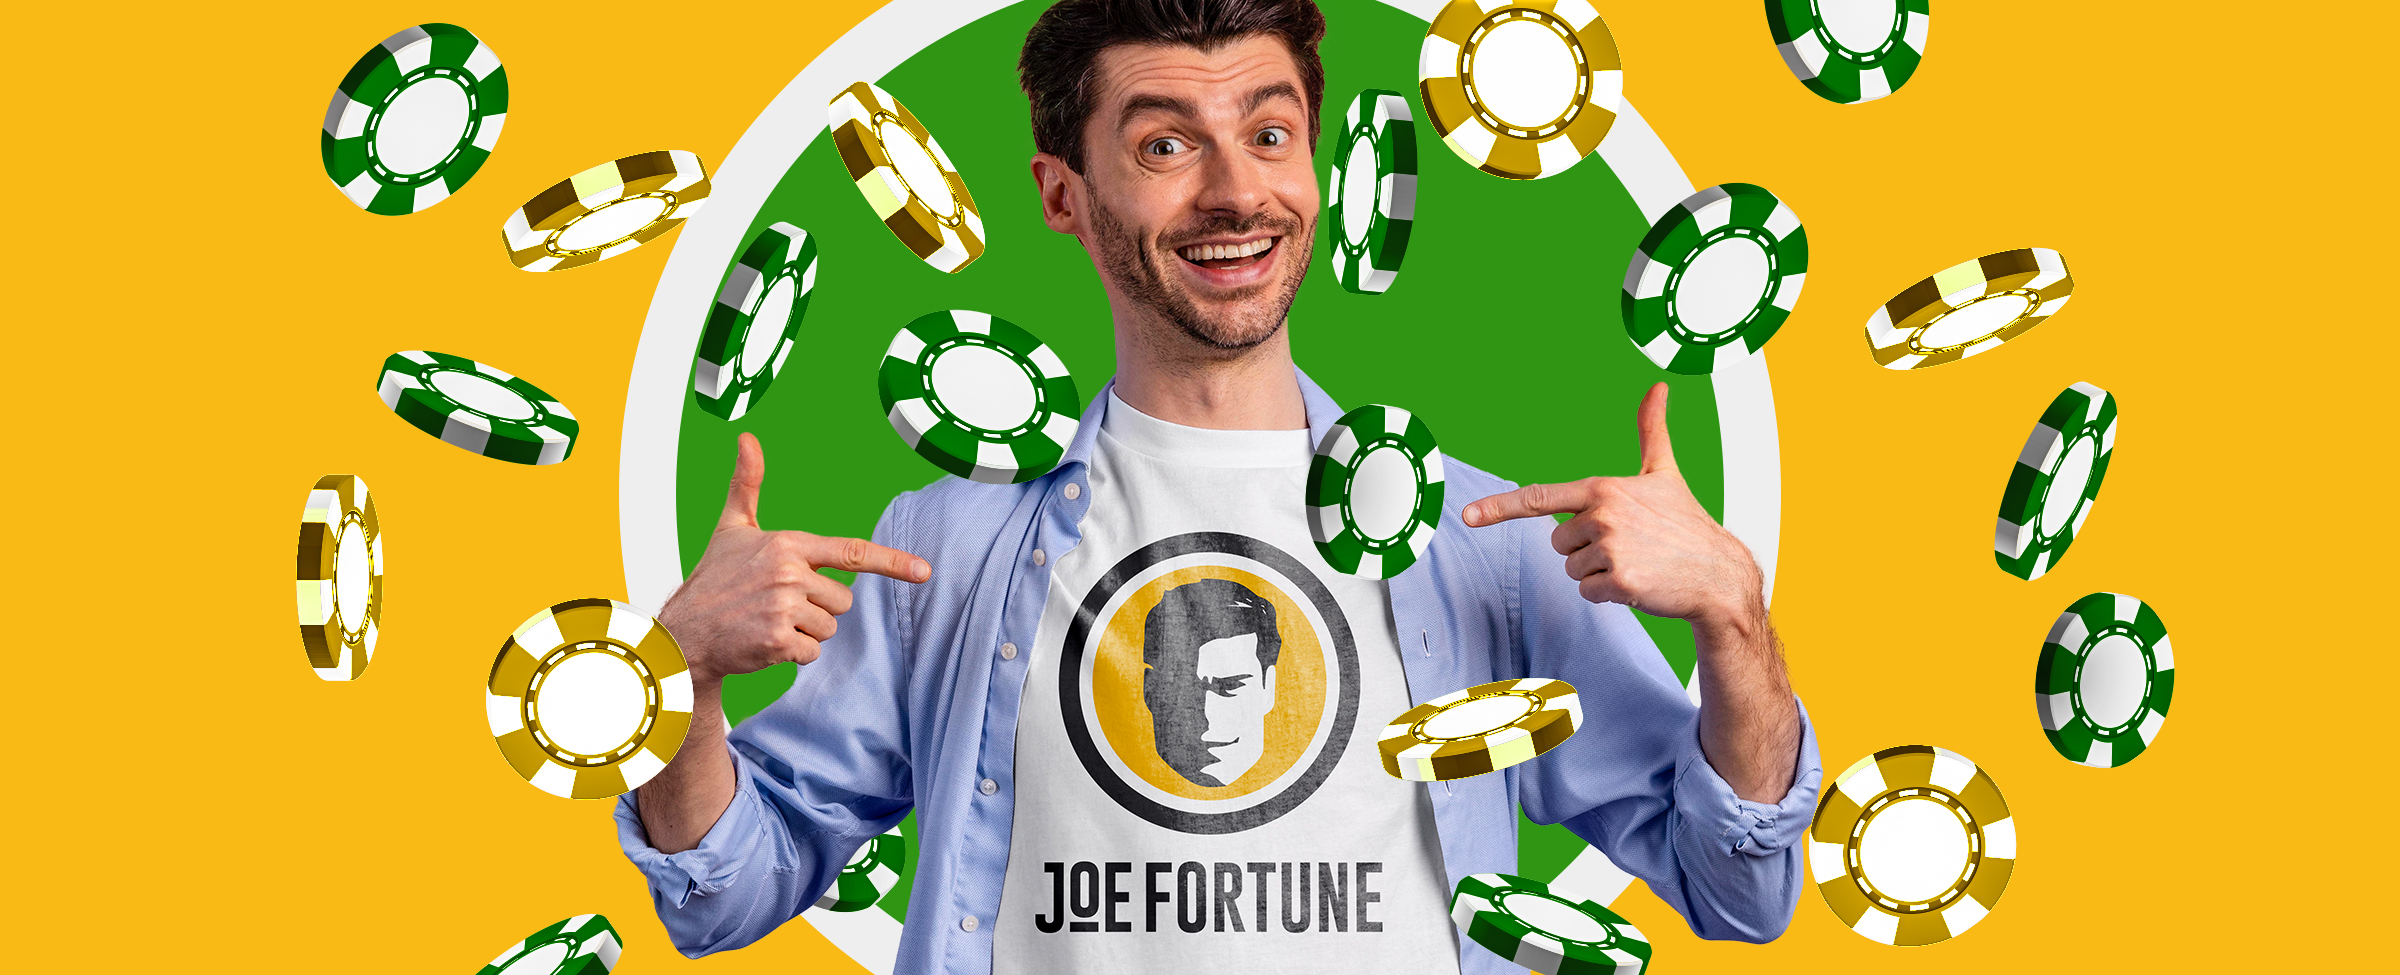 What better casino than Joe Fortune’s own? Let’s get you quickly up to speed on what makes playing at Joe’s a no-brainer. 